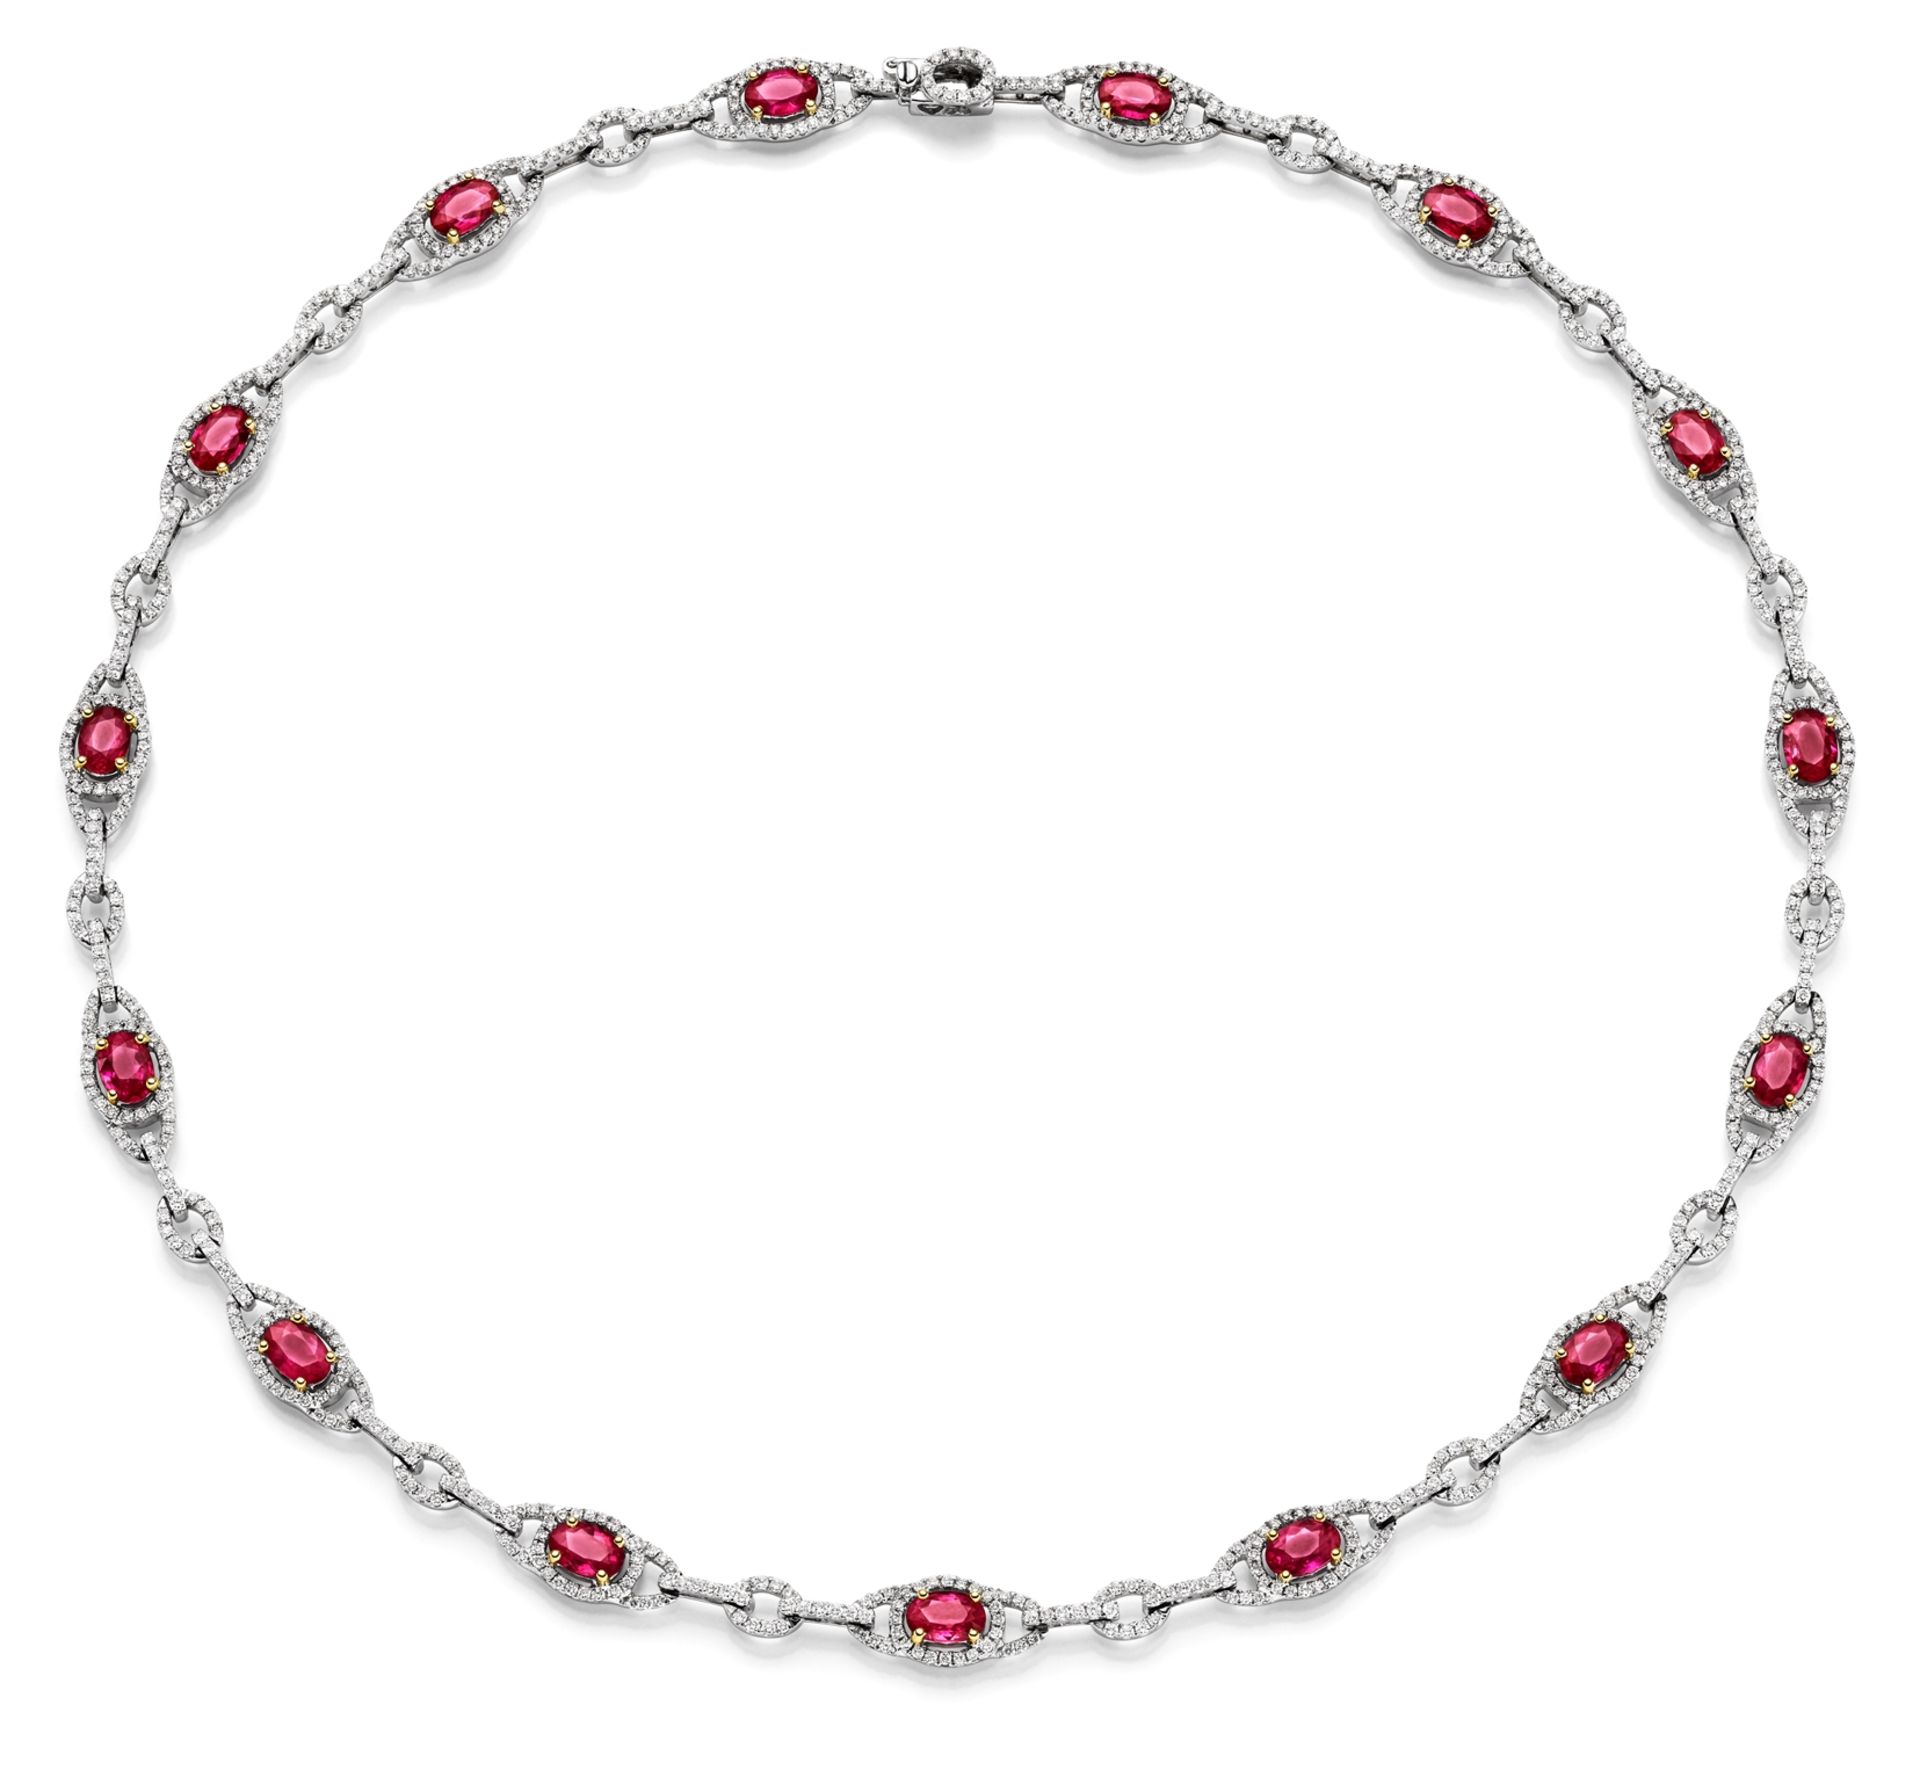 Ruby necklace with diamonds